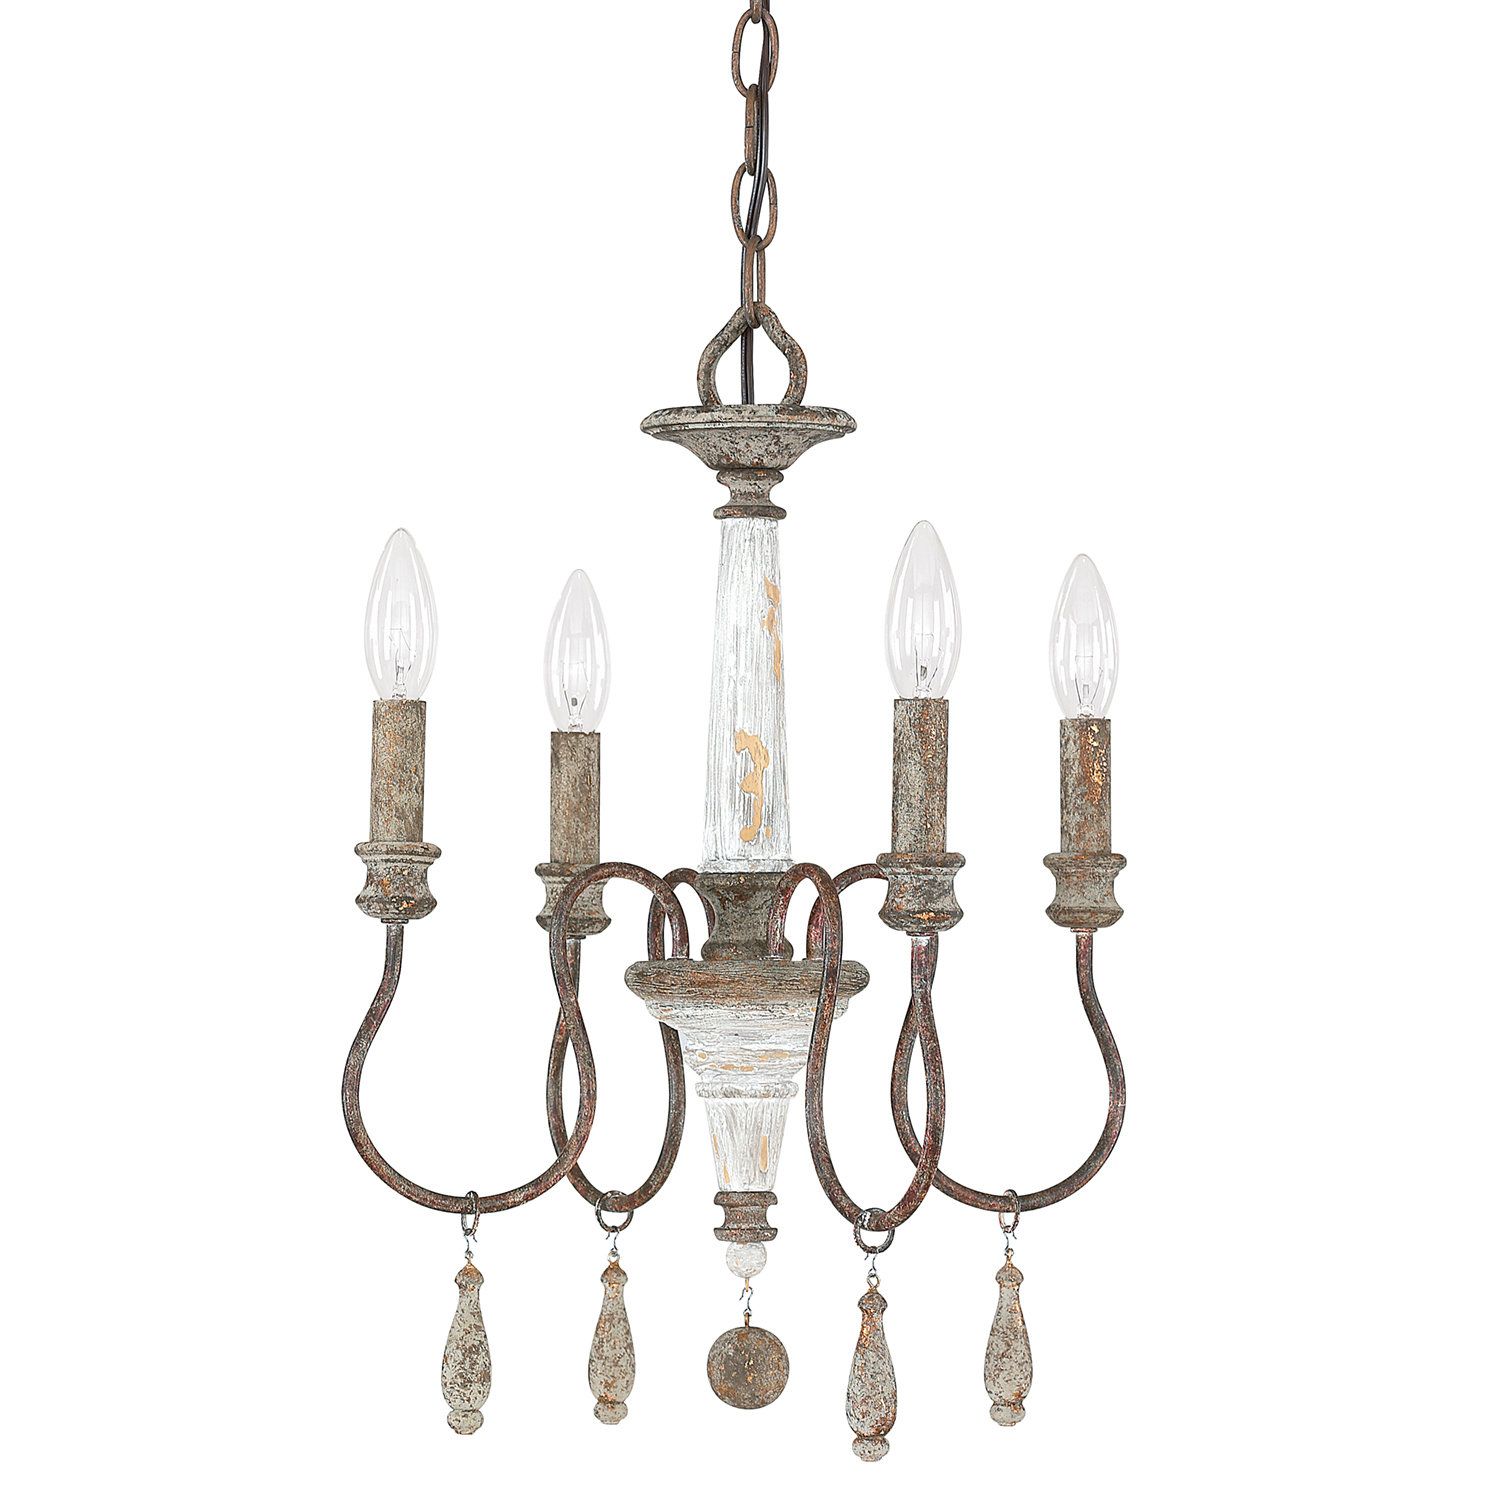 Armande Candle Style Chandelier Intended For Armande Candle Style Chandeliers (View 3 of 30)